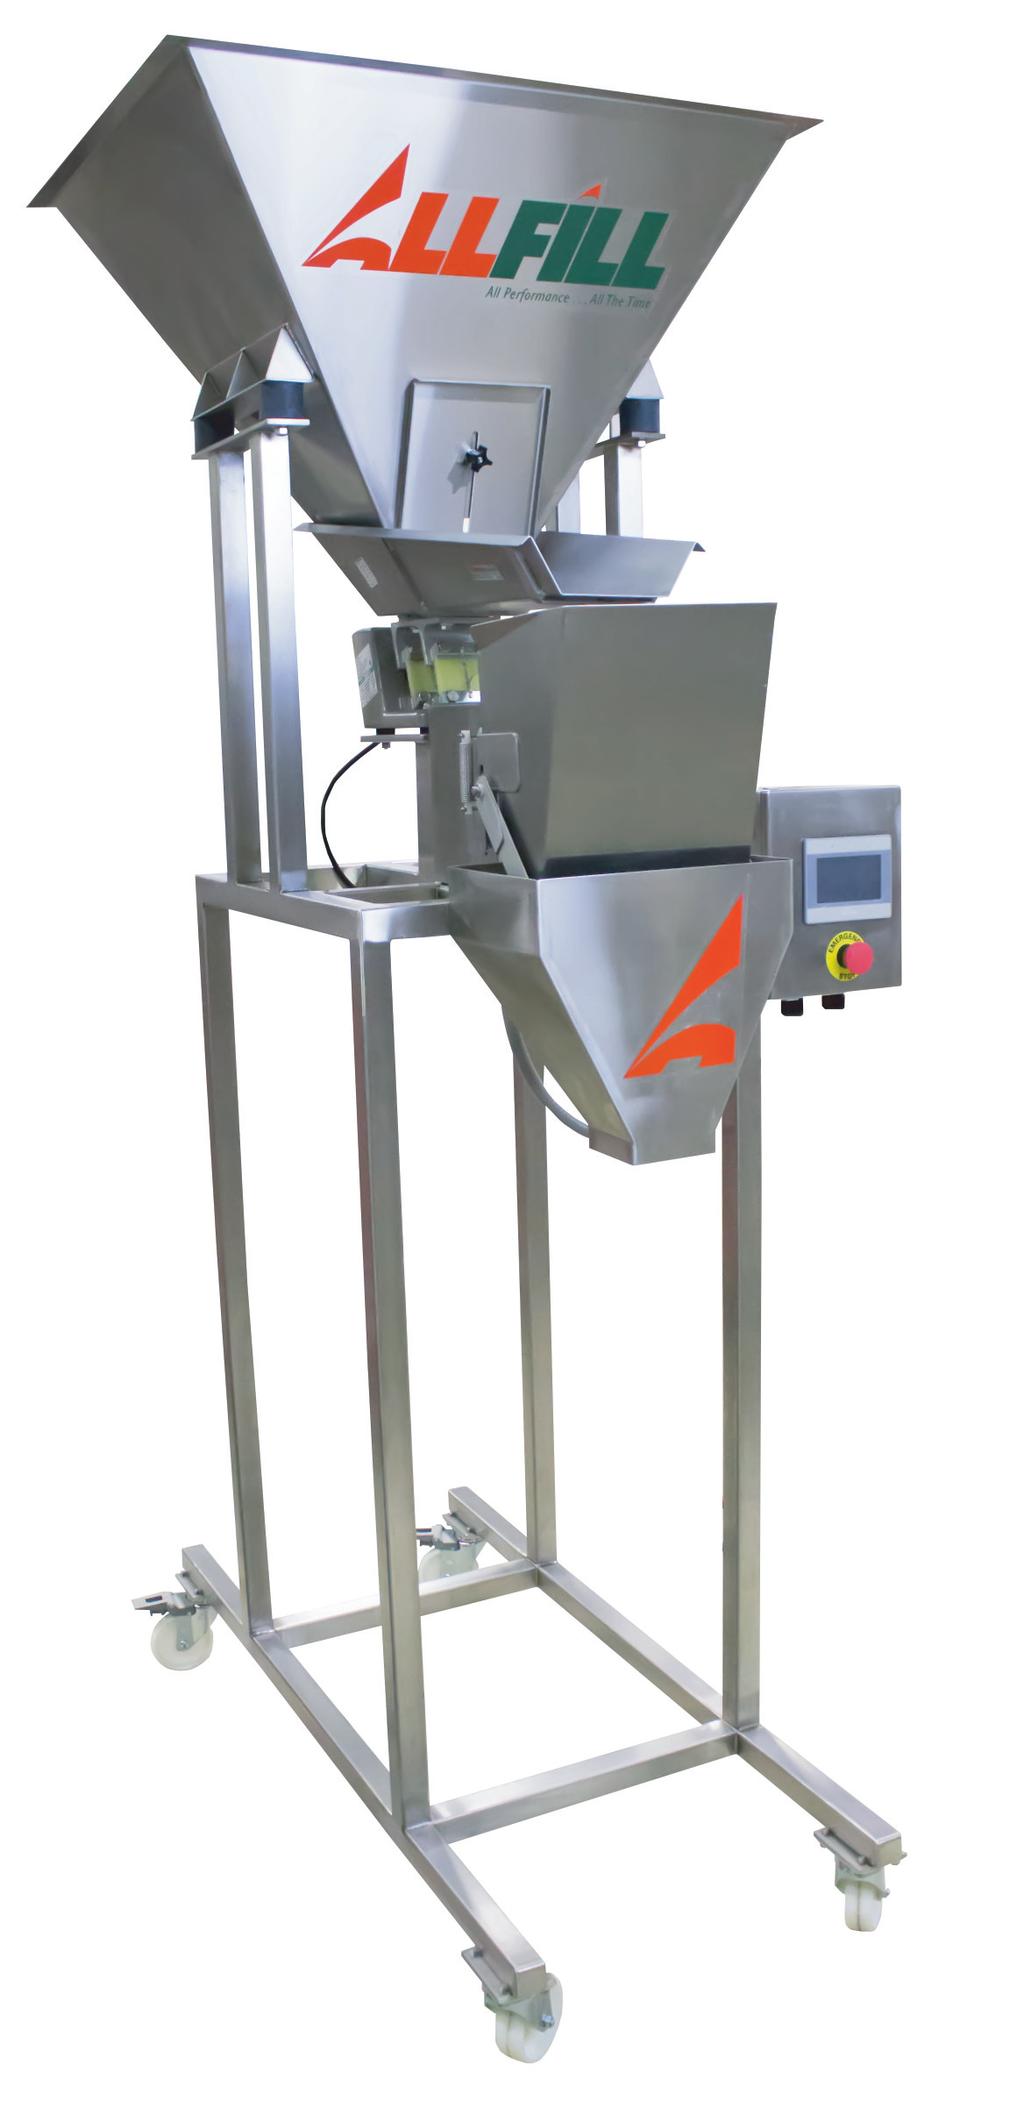 INTRODUCTION This section presents some introductory information about your All-Fill Model VF100e Vibratory Feeder.